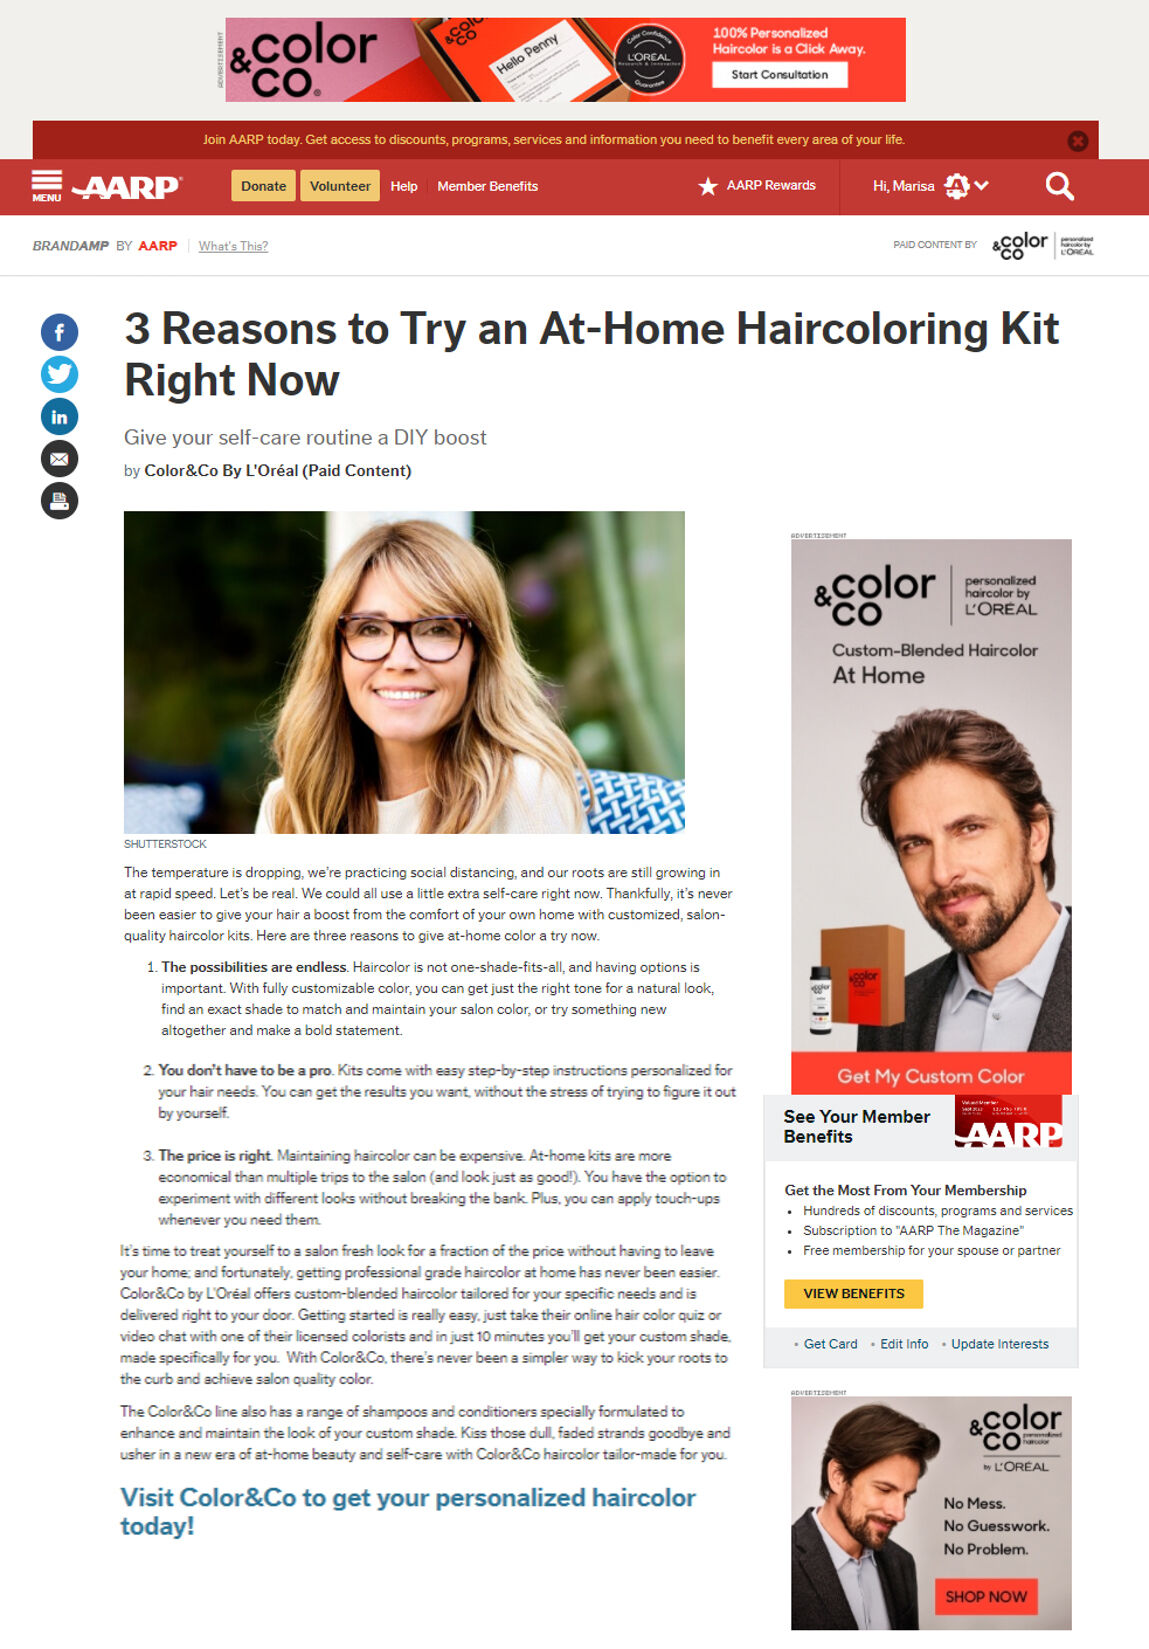 3 Reasons to Try an At Home Haircoloring Kit Right Now